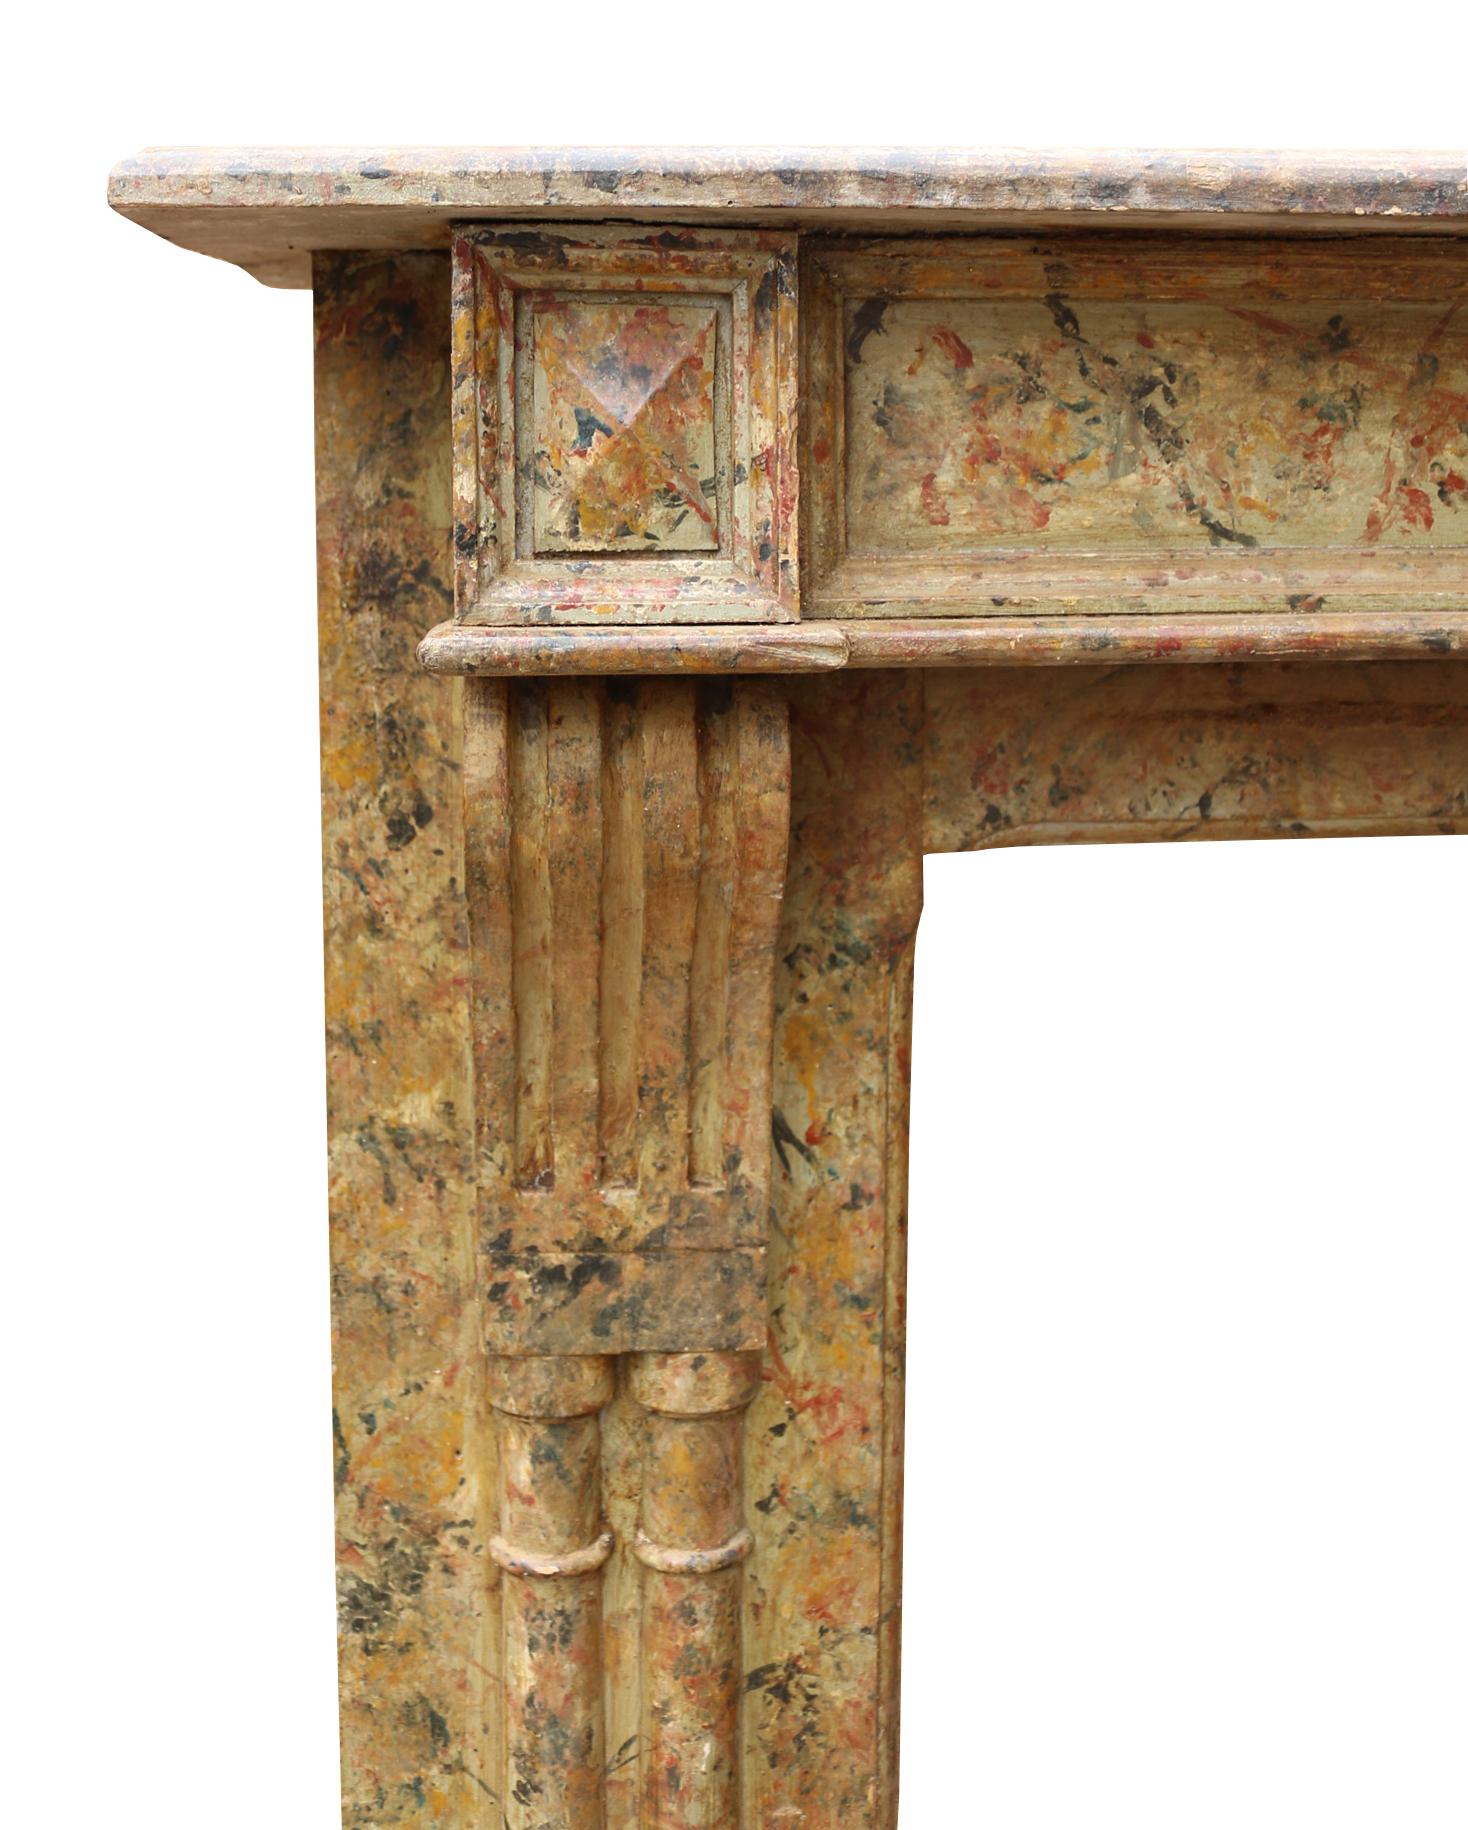 Antique French Hand Painted Fire Mantel In Good Condition For Sale In Wormelow, Herefordshire